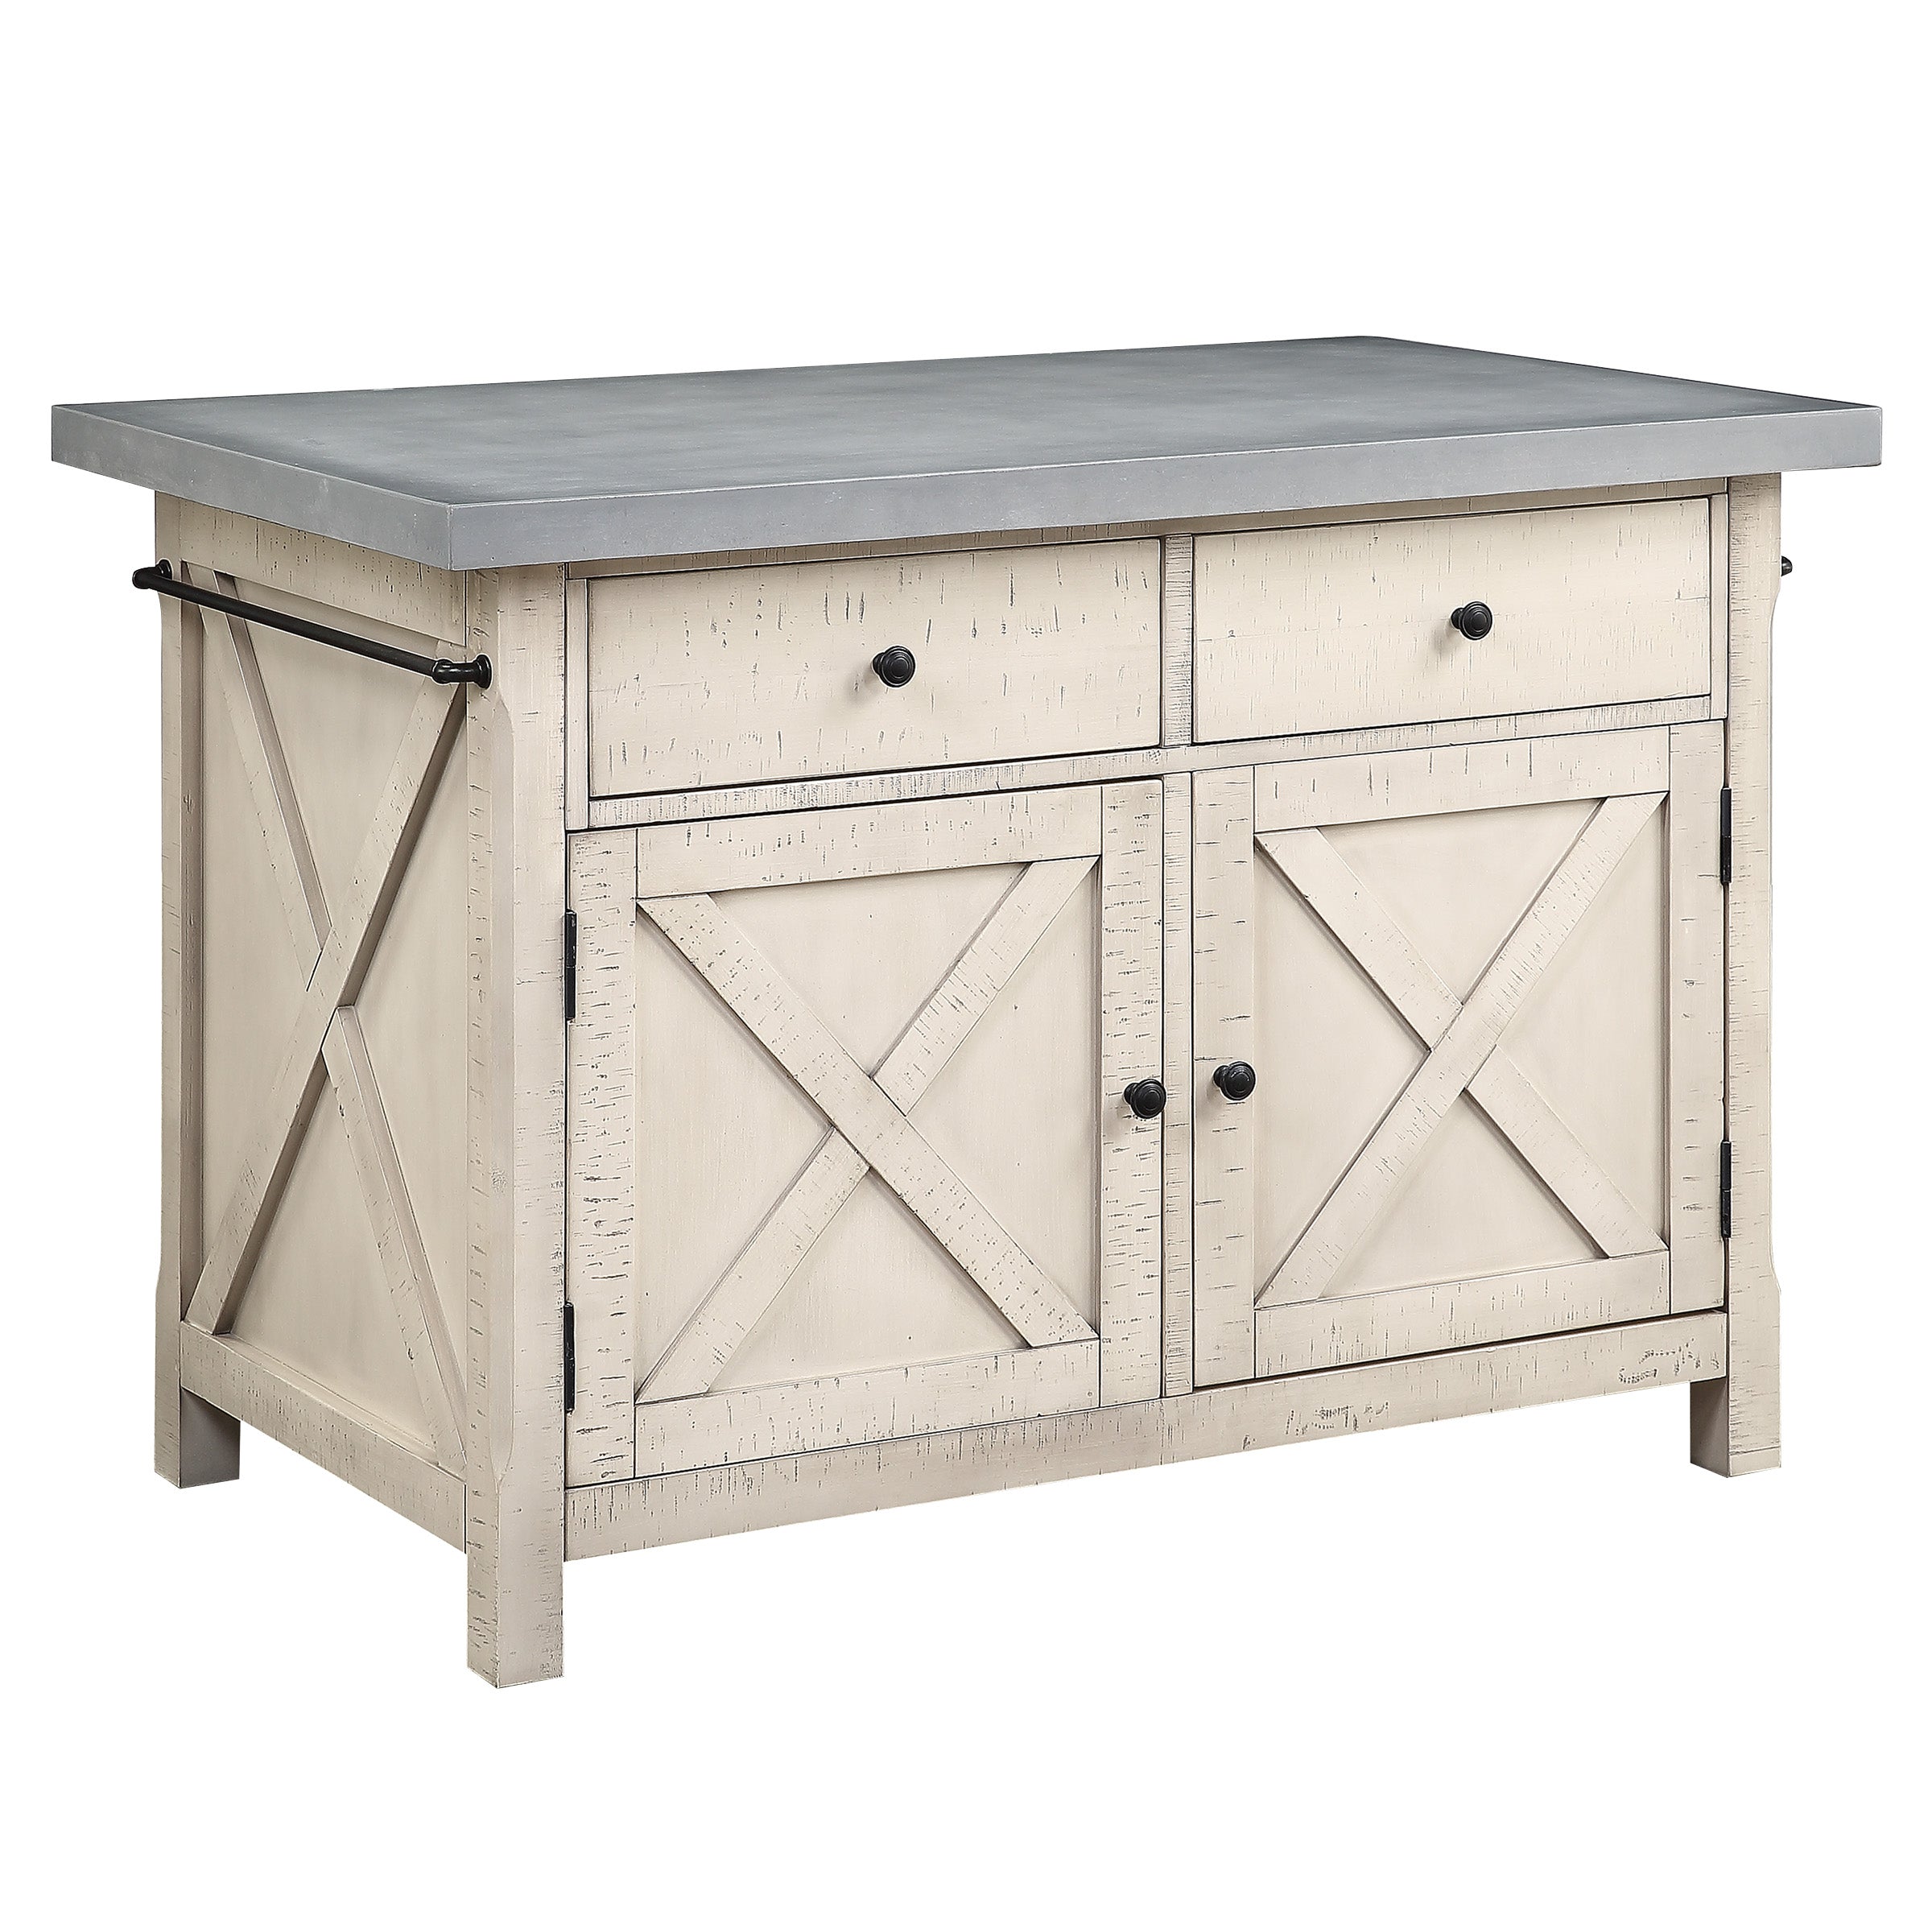 OSP Furniture Nashville Kitchen Island with Cement like Grey Top and 2 Stools